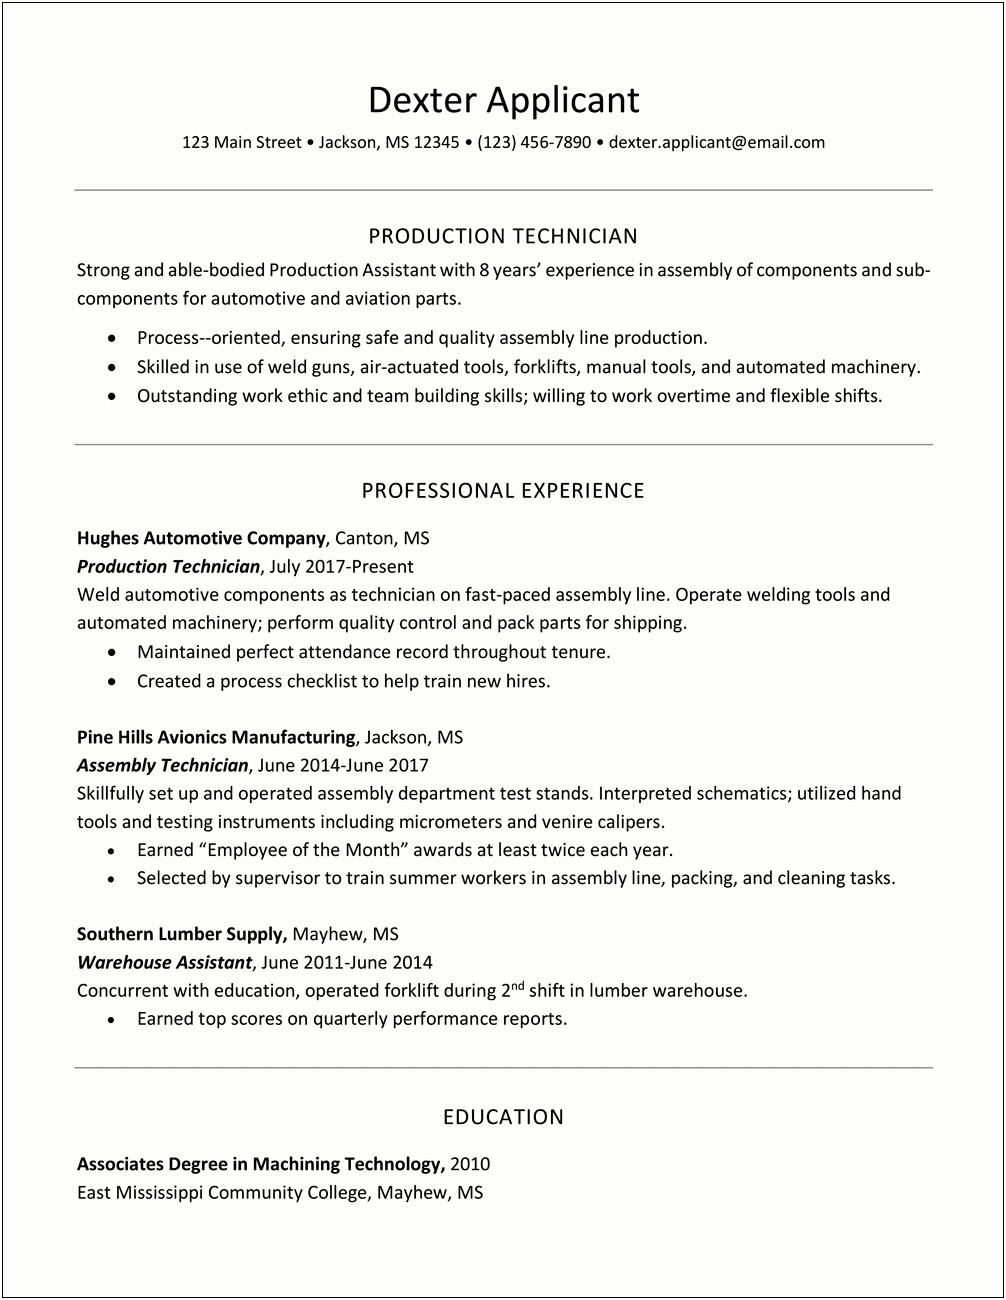 Examples Of Good Looking Resumes